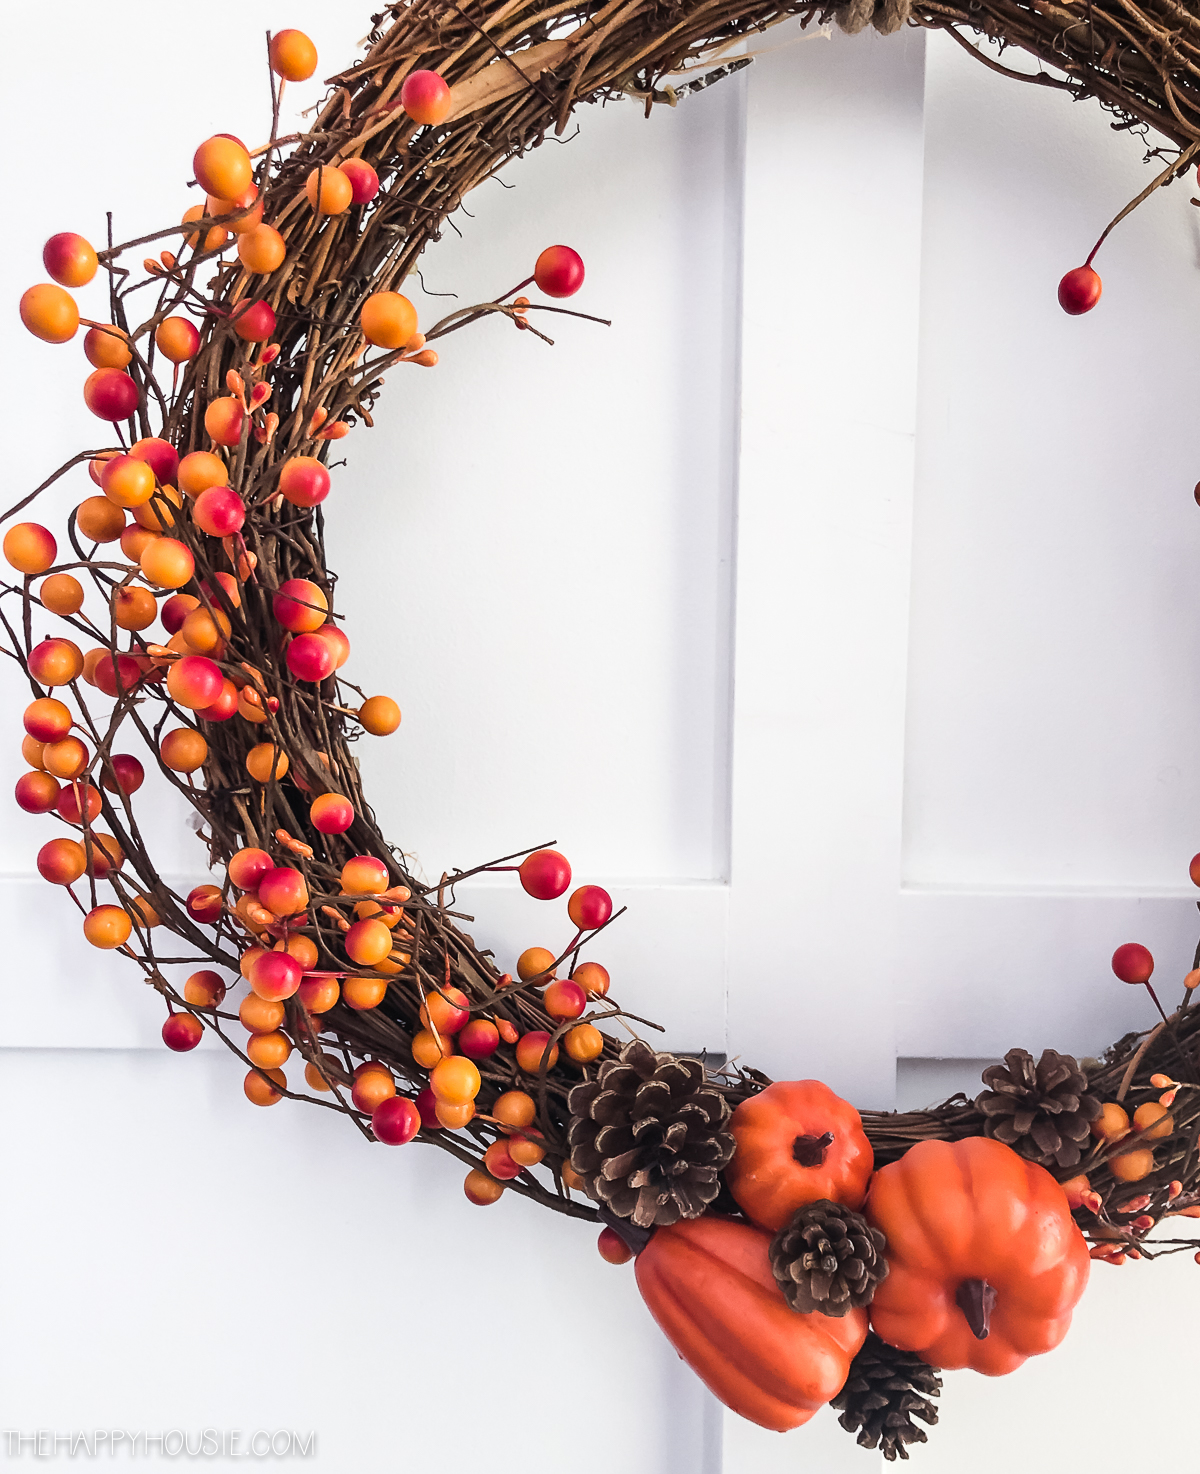 A wreath with orange and red berries on it.